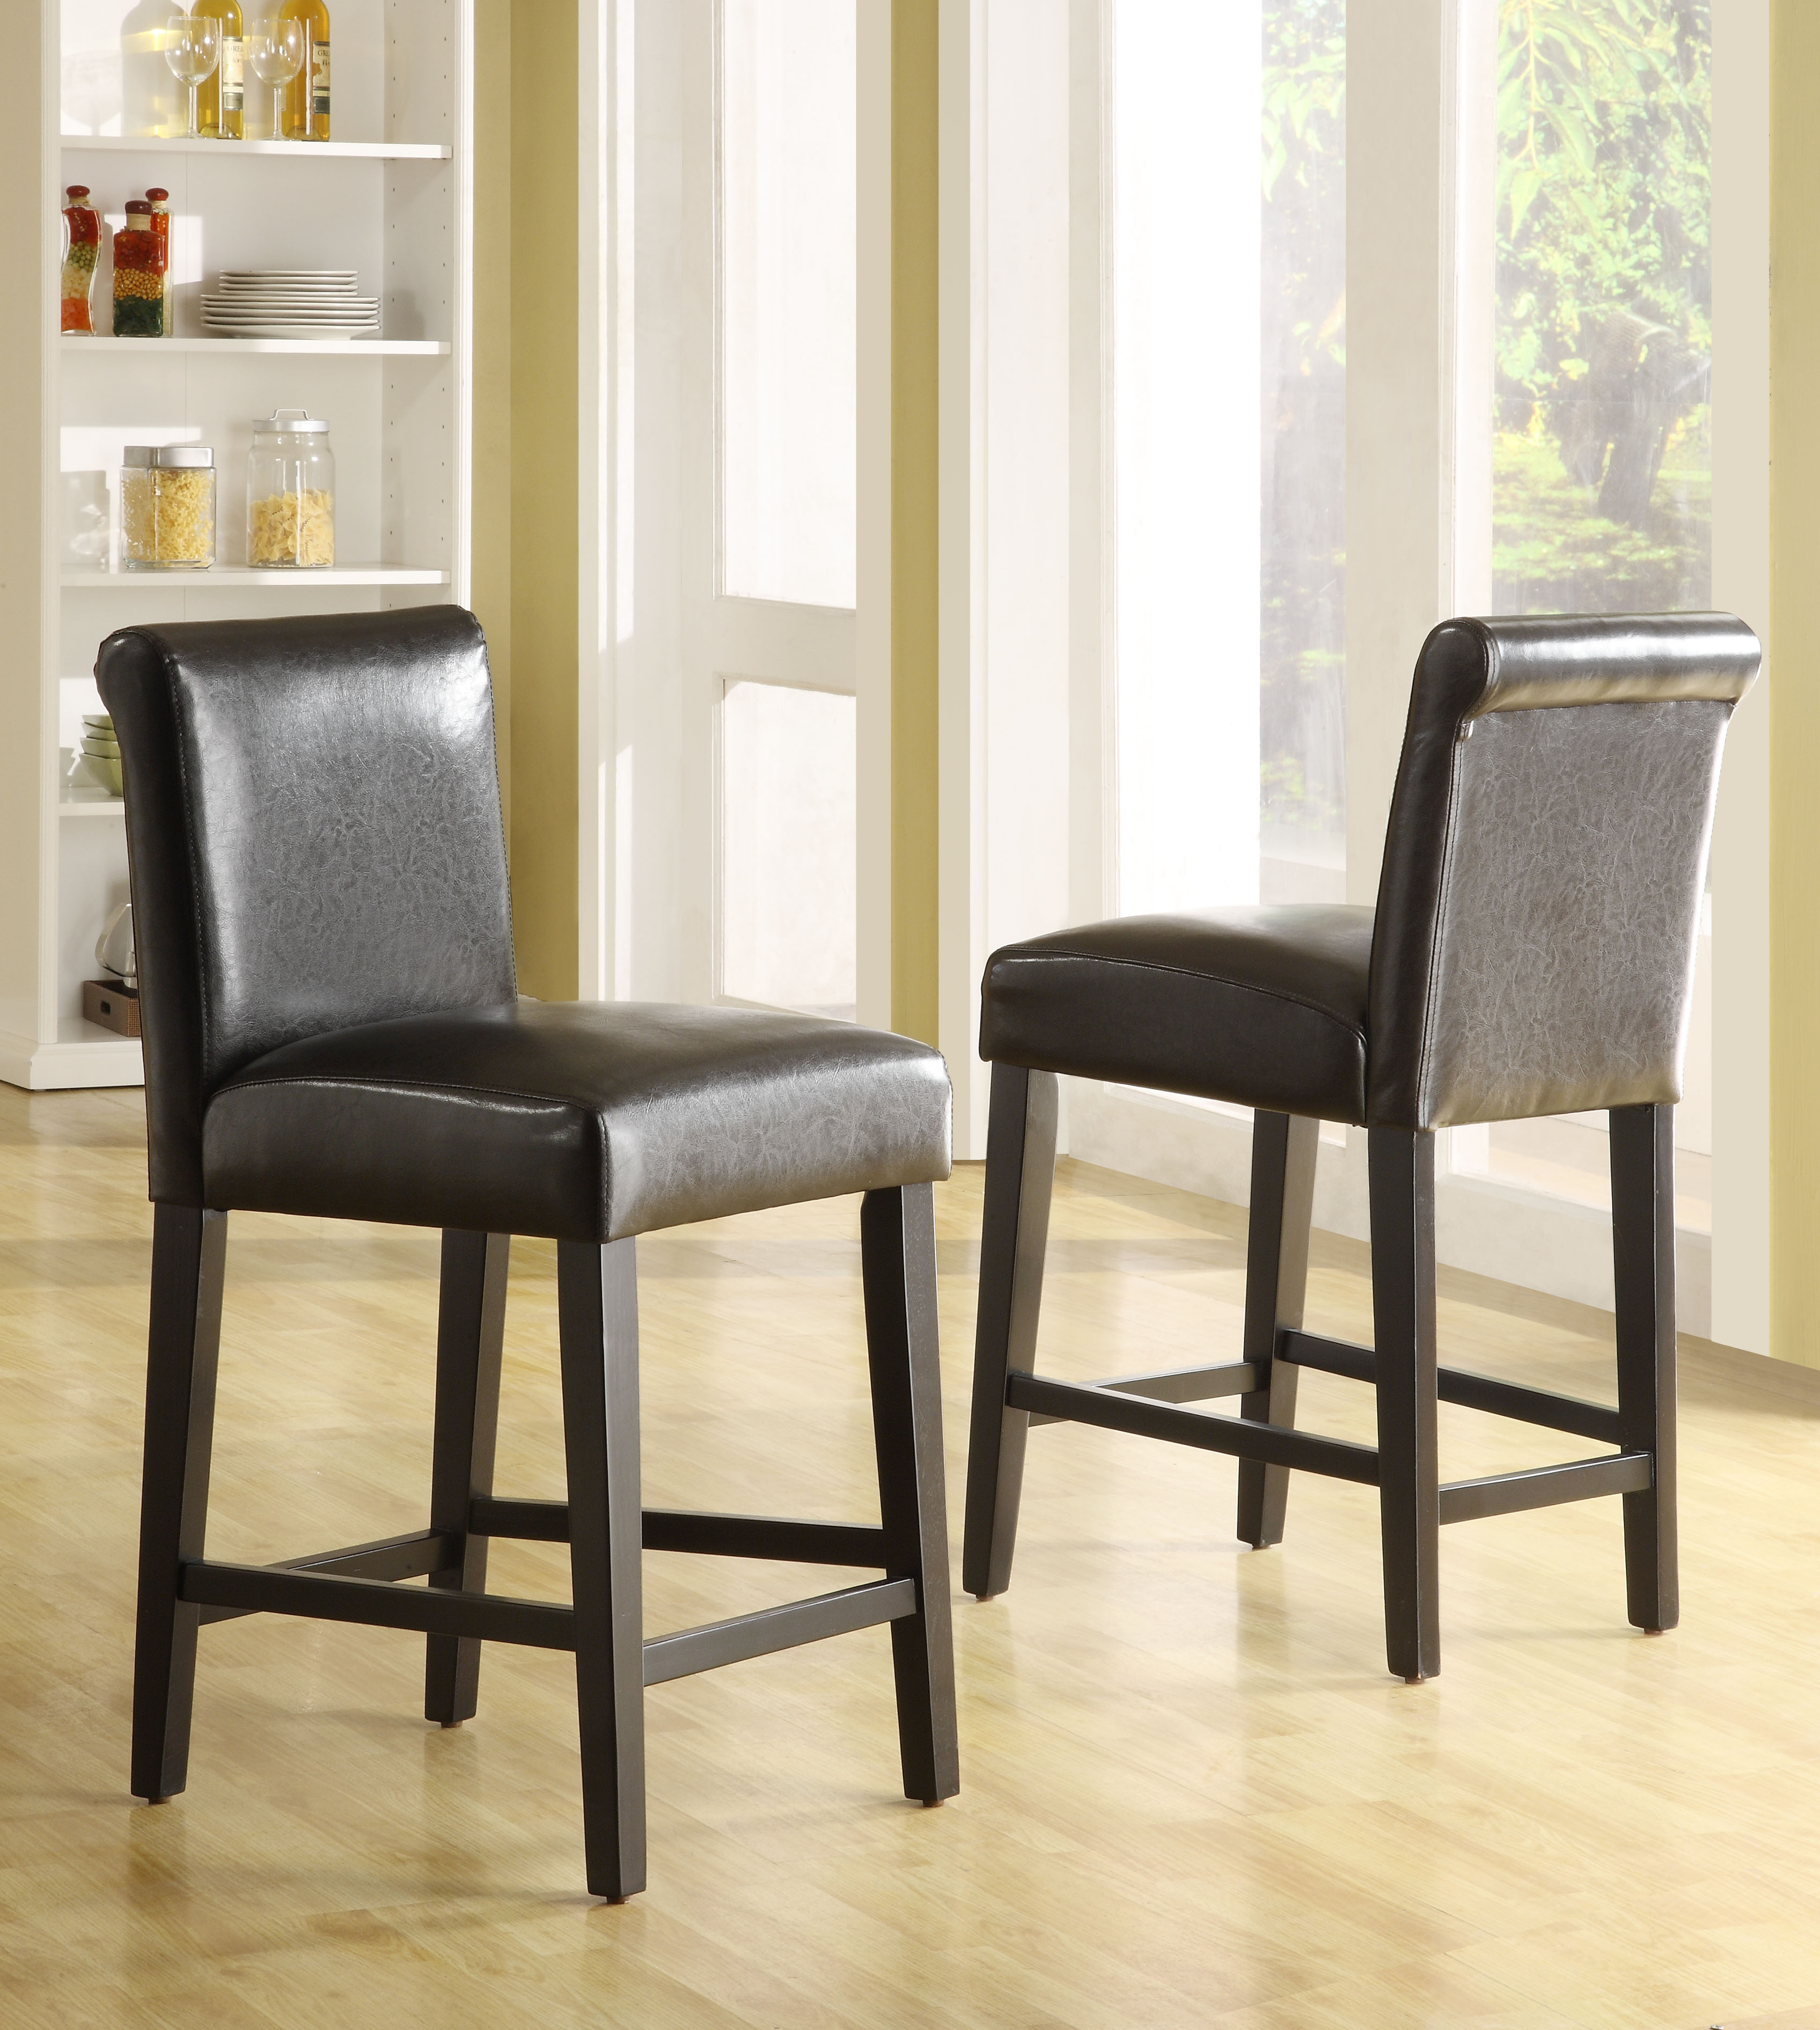 Faux Leather High Back Stools (Set of 2)